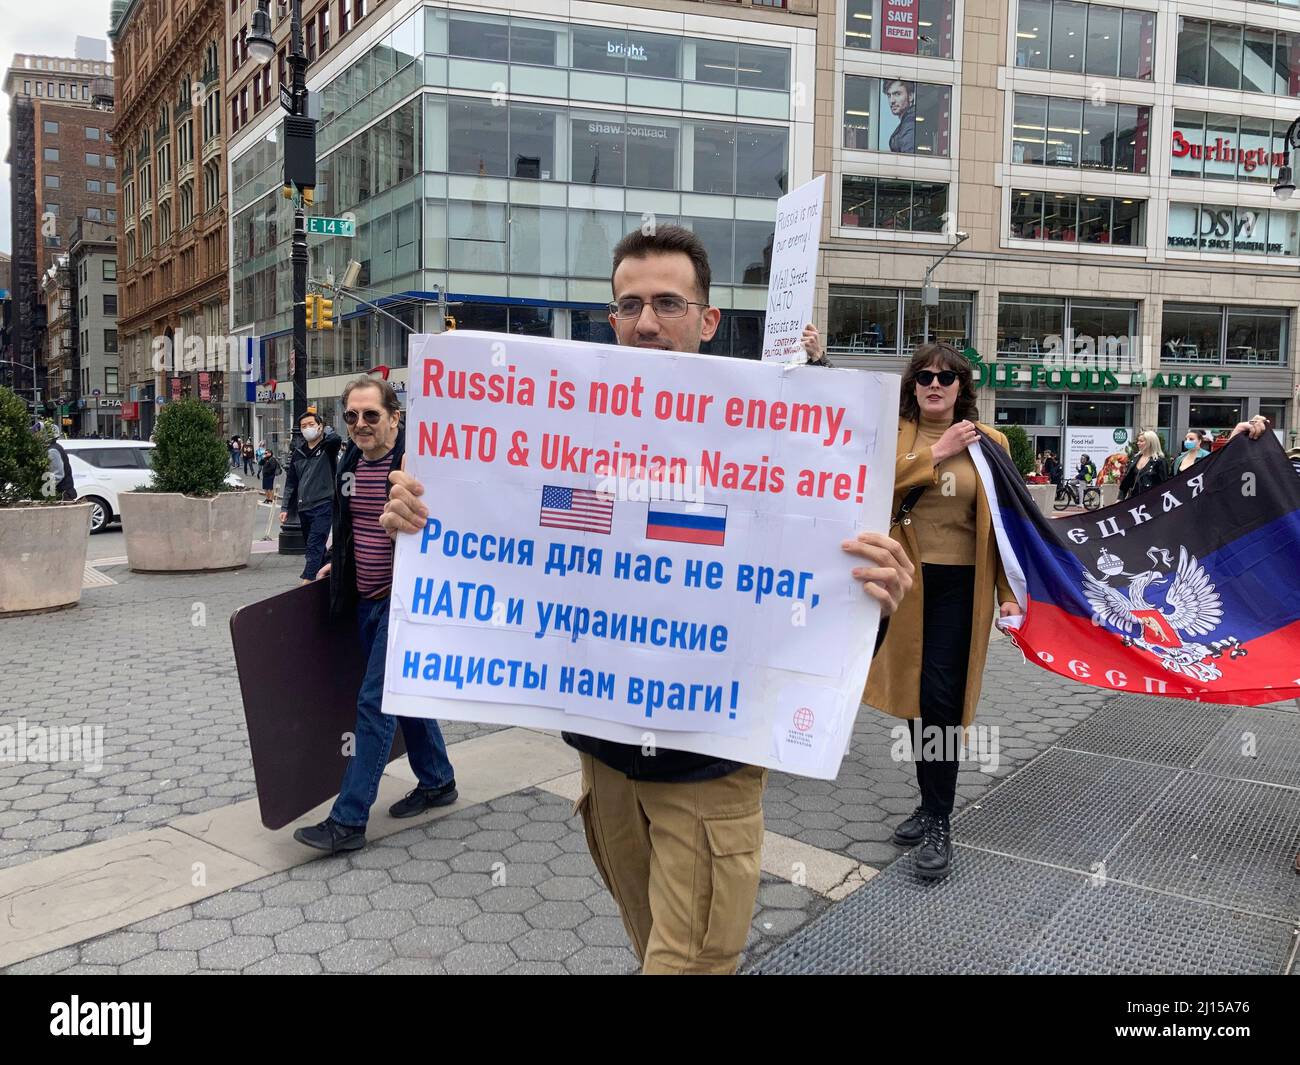 A small band of pro-Russian activists march around Union Square Park in New York showing support for Russia on Sunday, March 20, 2022. (© Frances M. Roberts) Stock Photo